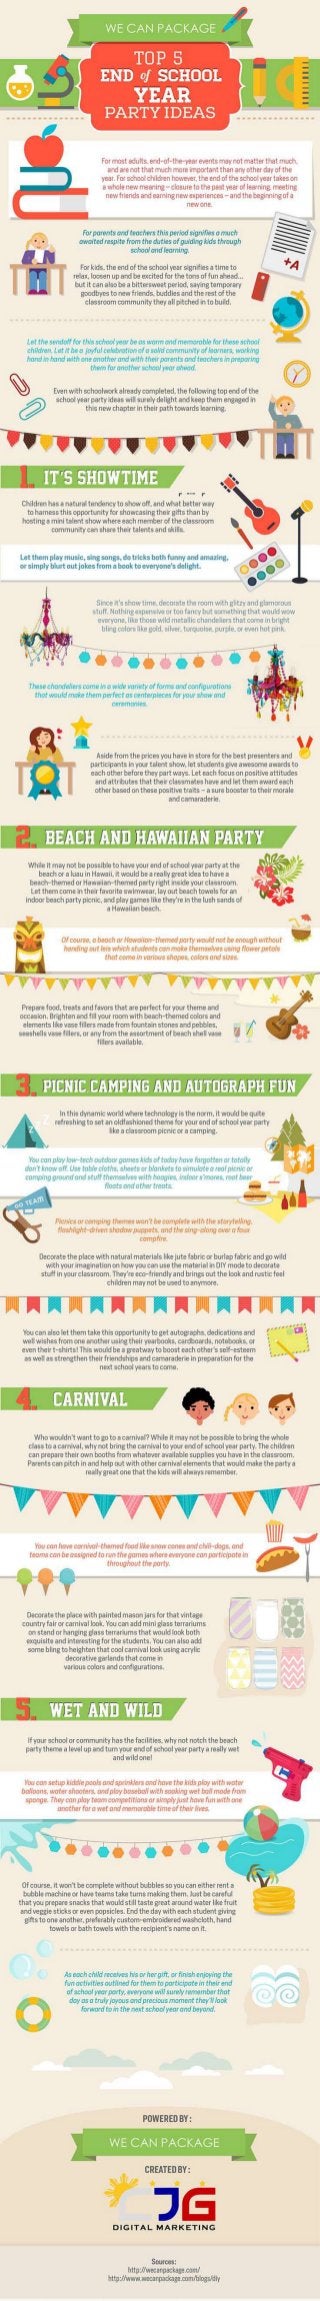 Top 5 End of School Year Party Ideas (Infographic)